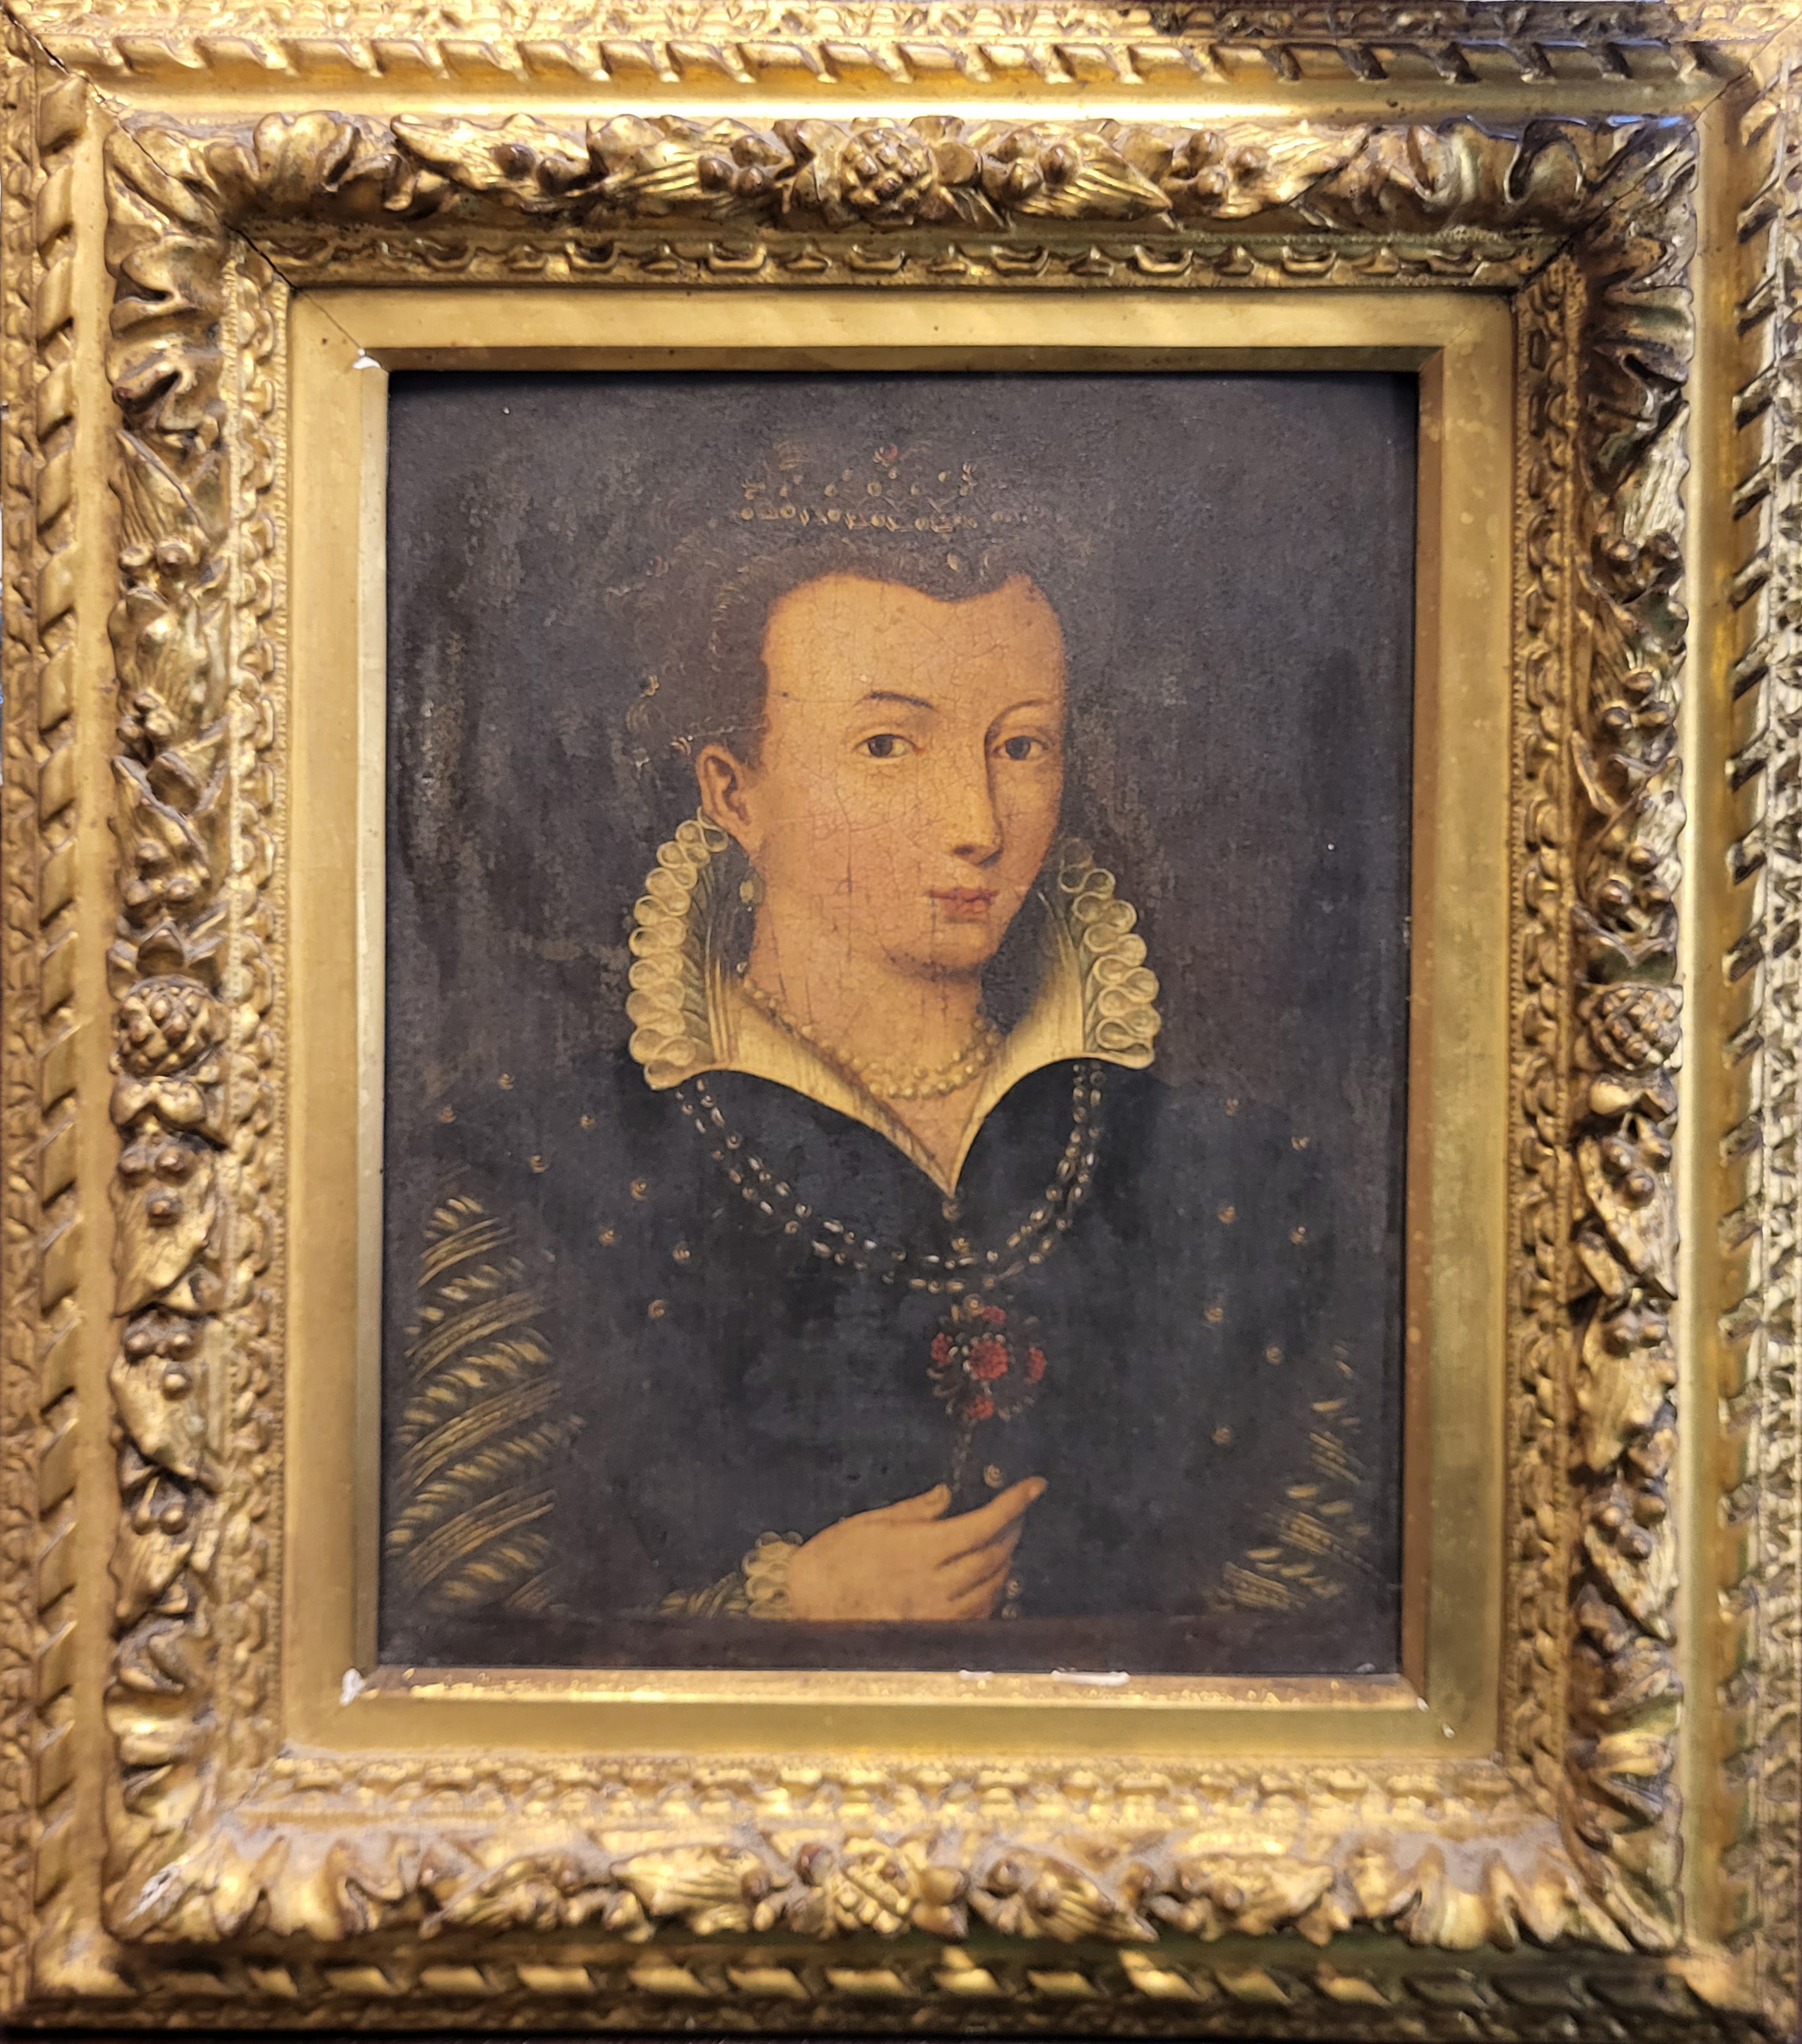 A 17TH CENTURY NORTH ITALIAN SCHOOL OIL ON PANEL, BUST LENGTH PORTRAIT OF A YOUNG LADY Wearing a - Image 2 of 3